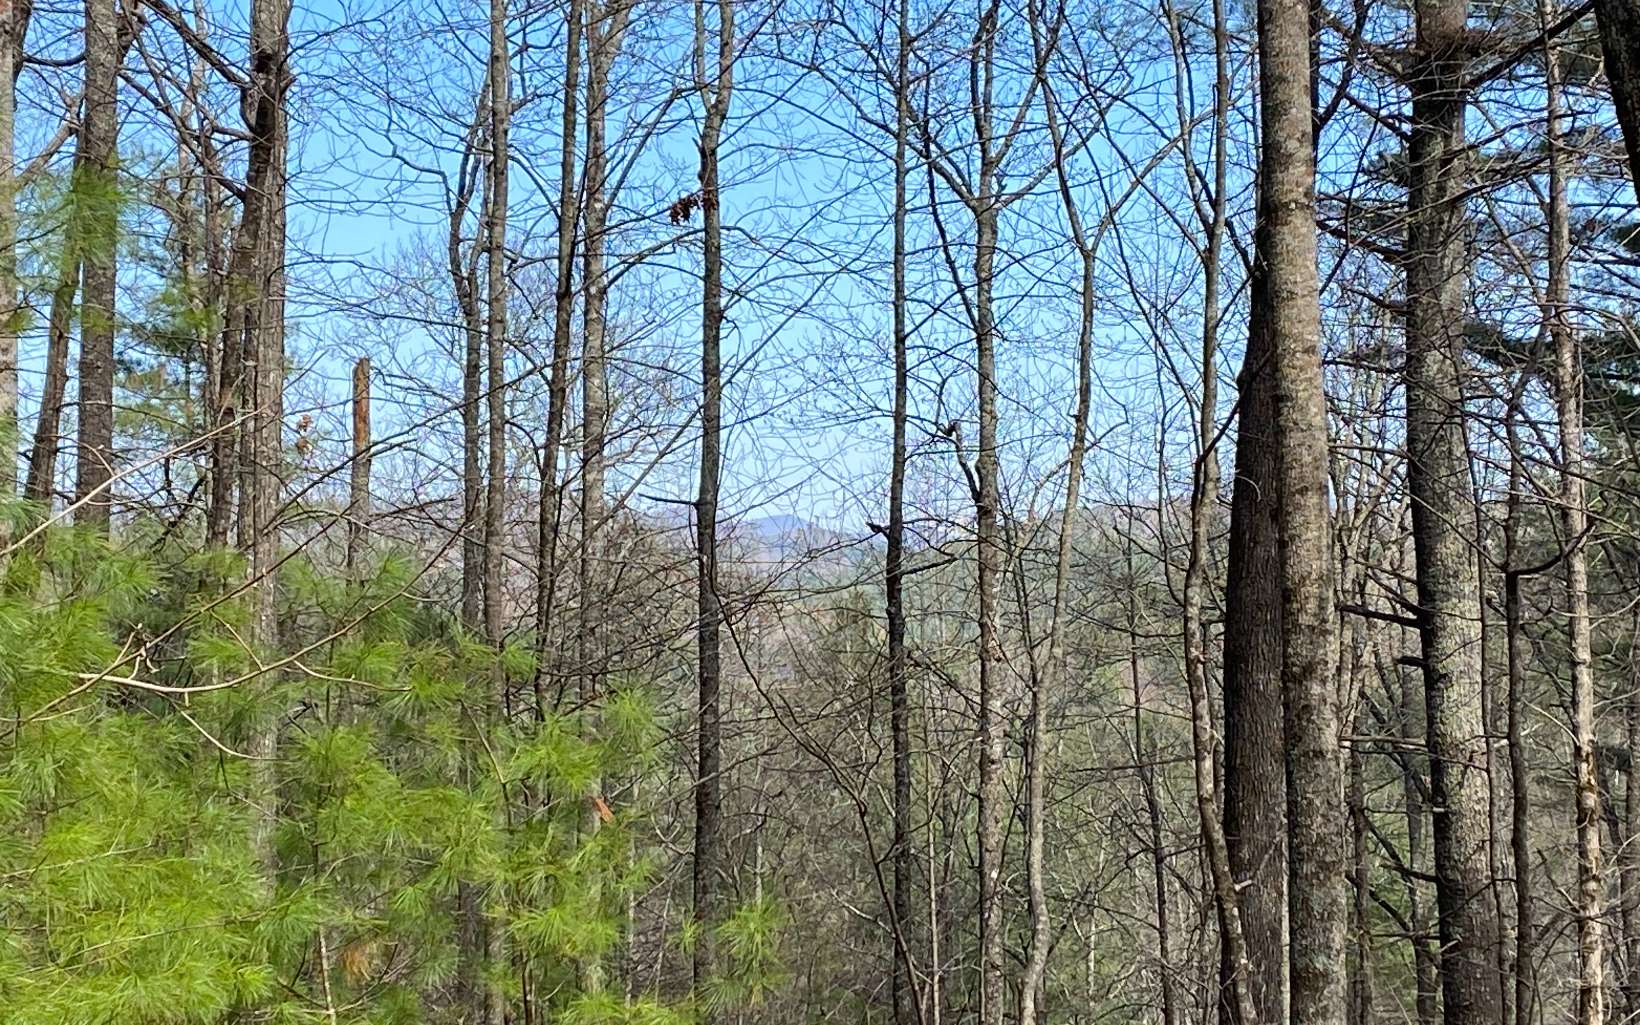 Incredible Long-Range Mountain Views & Coopers Creek Access! One of the best building sites within the pristine community, The Retreat at Coopers Creek! Come build your dream mountain home on this beautiful 1.63 acre tract with abundant mountain flora and gigantic trees! Land lays very nicely with a mountain knoll along the ridge that is a natural build site! Community water, electric/telephone/internet, and easy, paved access all the way to the property! Catch your limit of stunning rainbow trout in the shimmering waters of Coopers Creek at the common area! Just a few minutes from the National Forest for fishing, hunting, hiking, and so much fun! Only a short, scenic drive into Blue Ridge or Blairsville for dining and shopping! Make your mountain dream a reality!